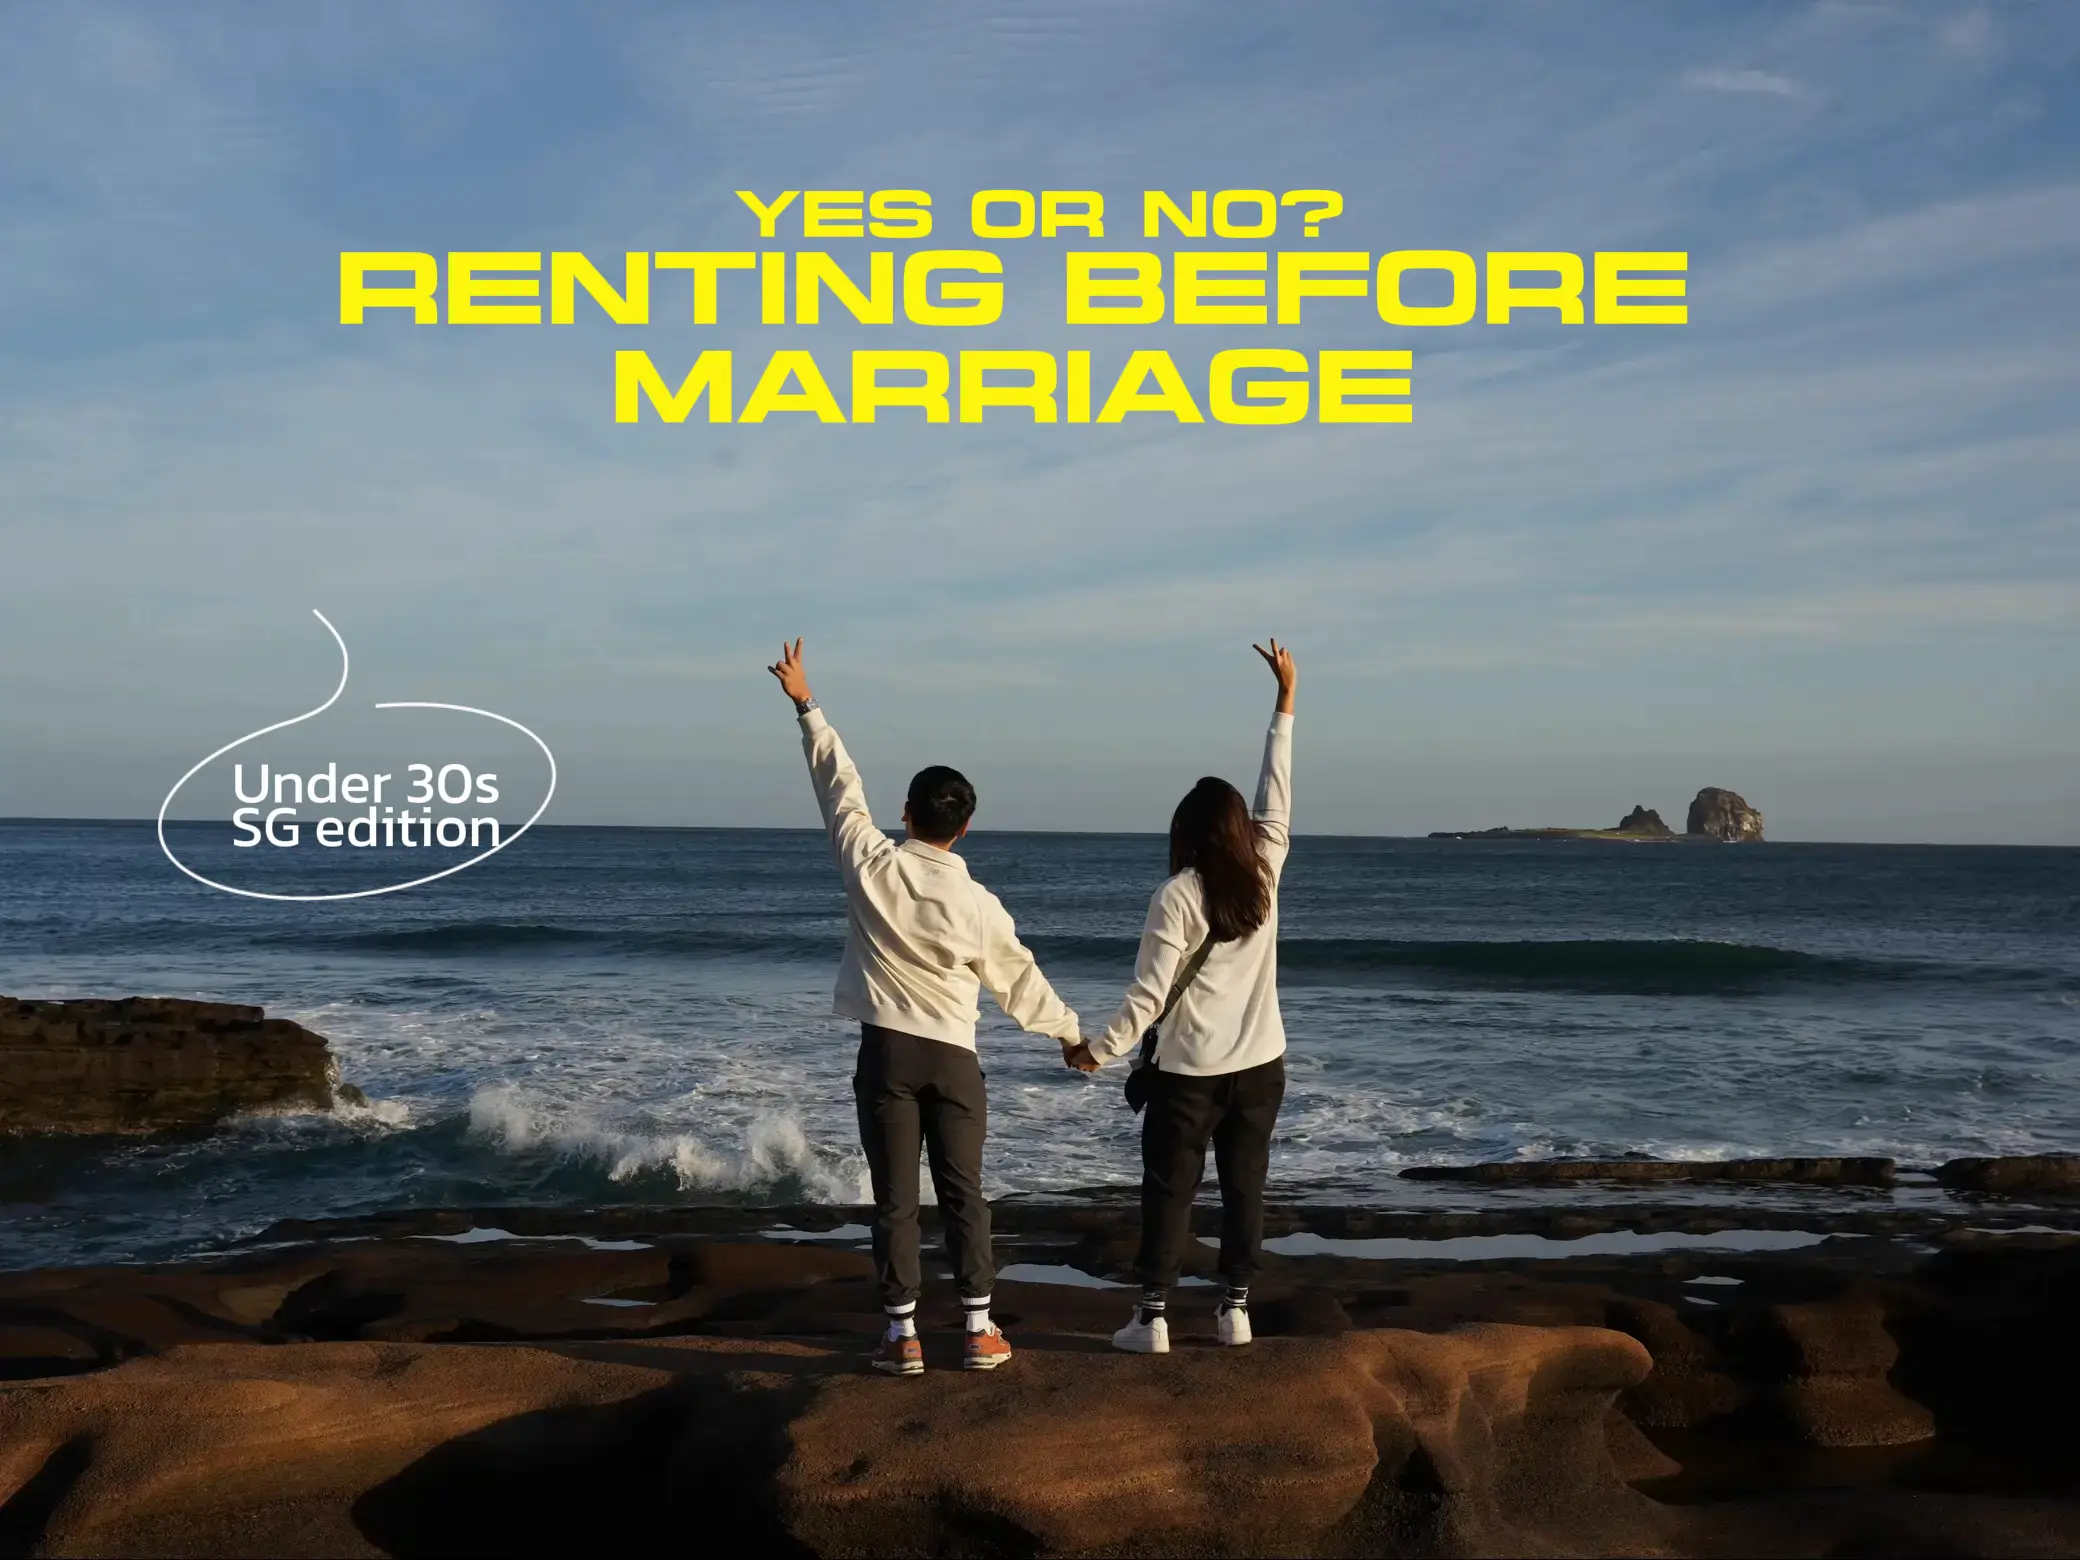 Renting before marriage - yes or no? 's images